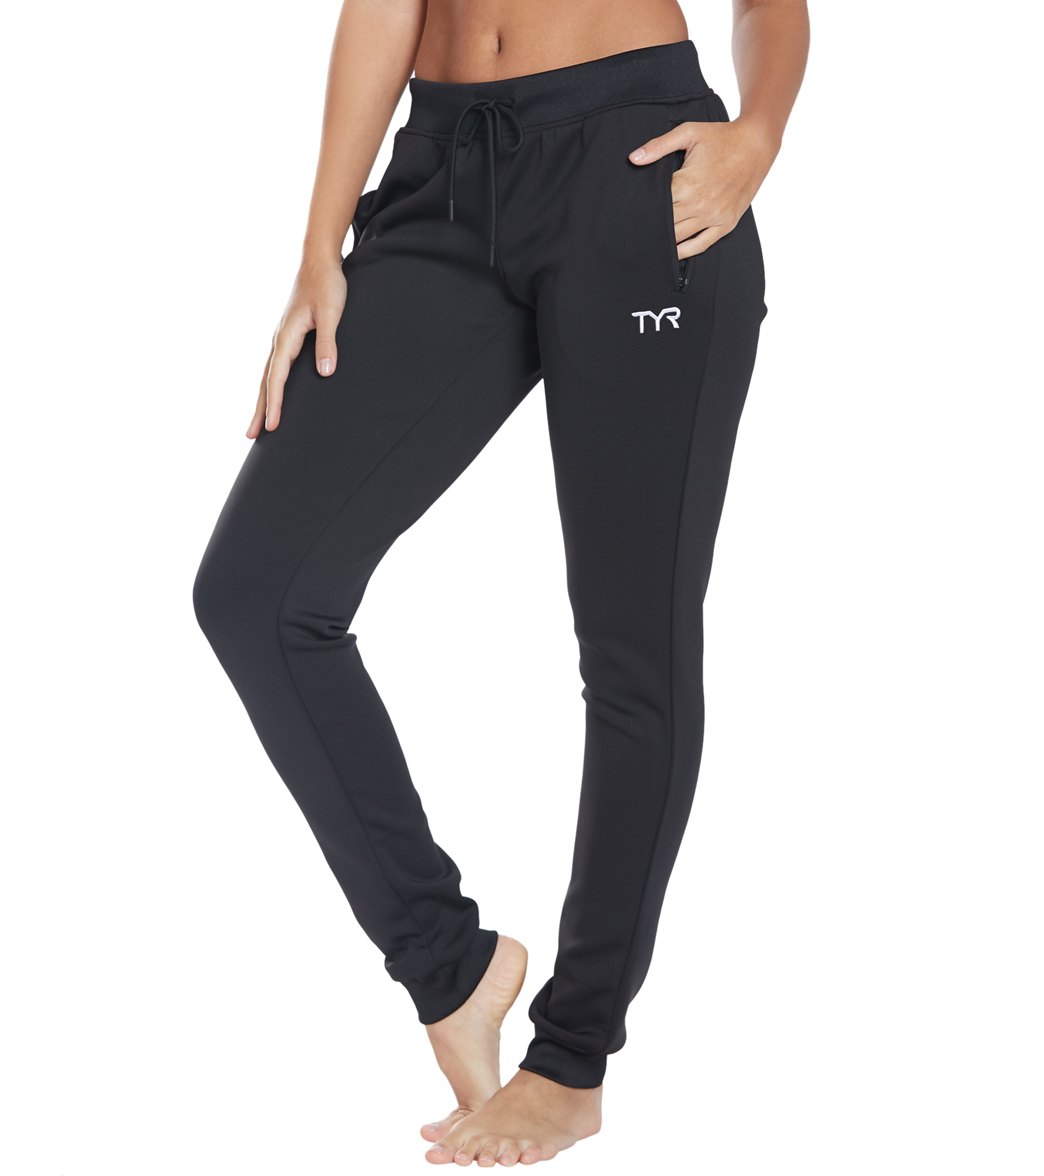 TYR Women's Team Jogger Pant at